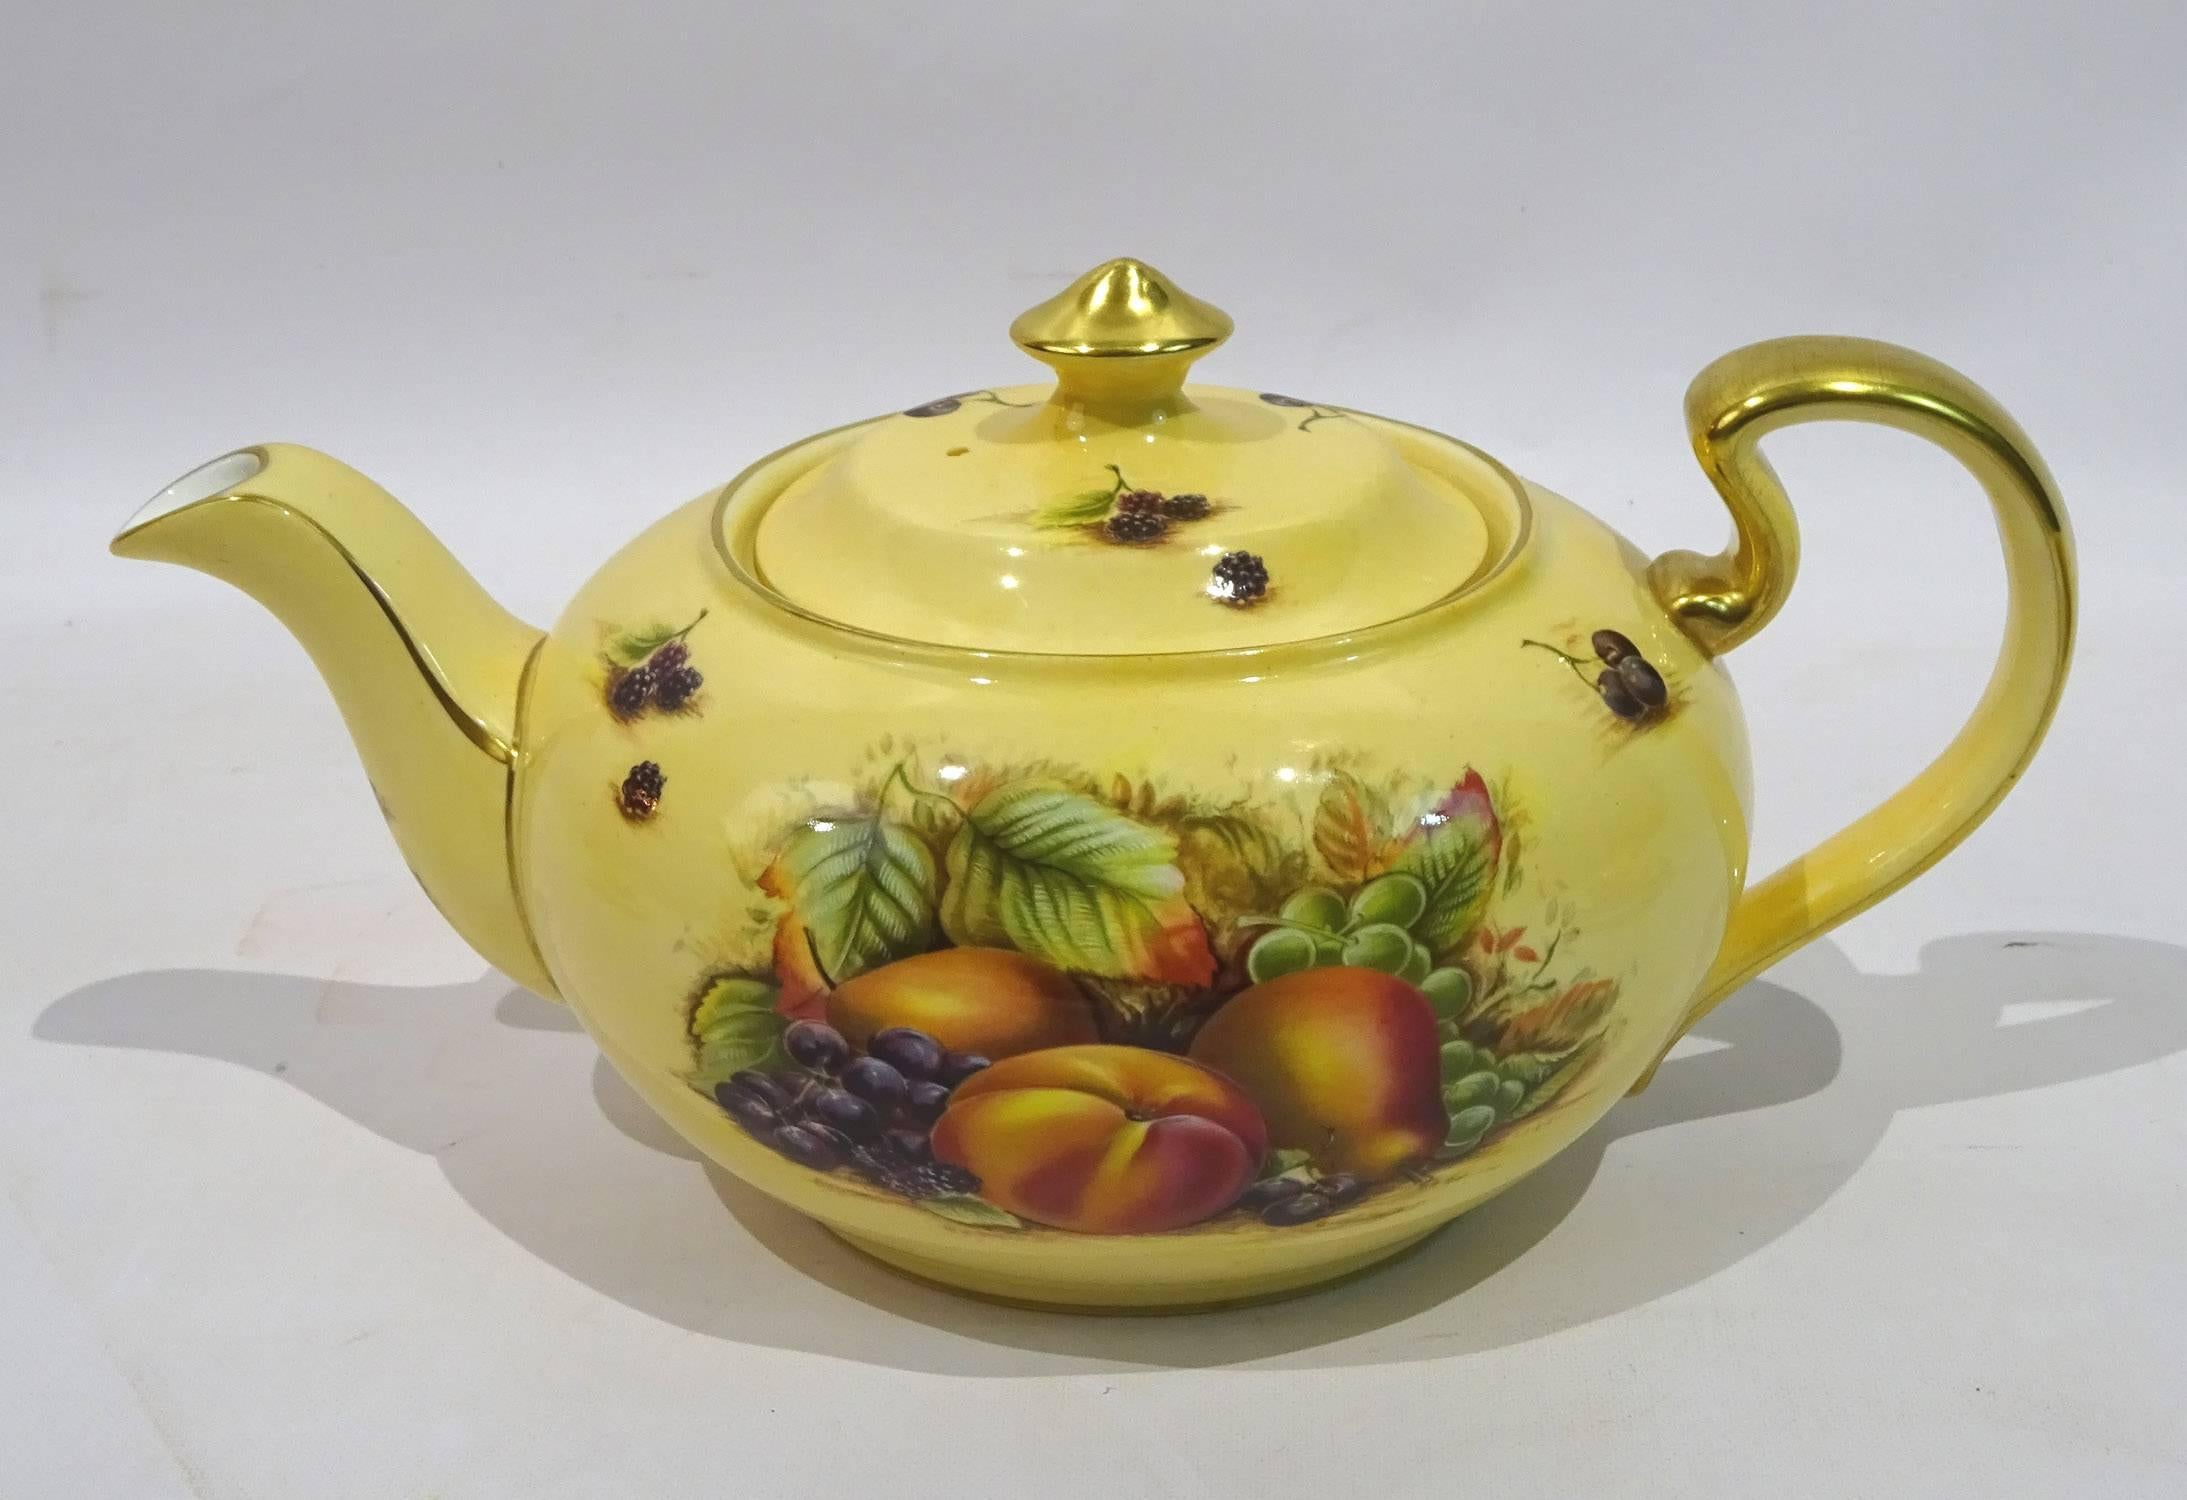 Nine-piece set of Orchard Gold China by John Aynsley, consisting of a tea and dessert service for two with a lidded tea pot, lidded sugar bowl, creamer, two cups and saucers and two dessert plates.

Teapot: 5